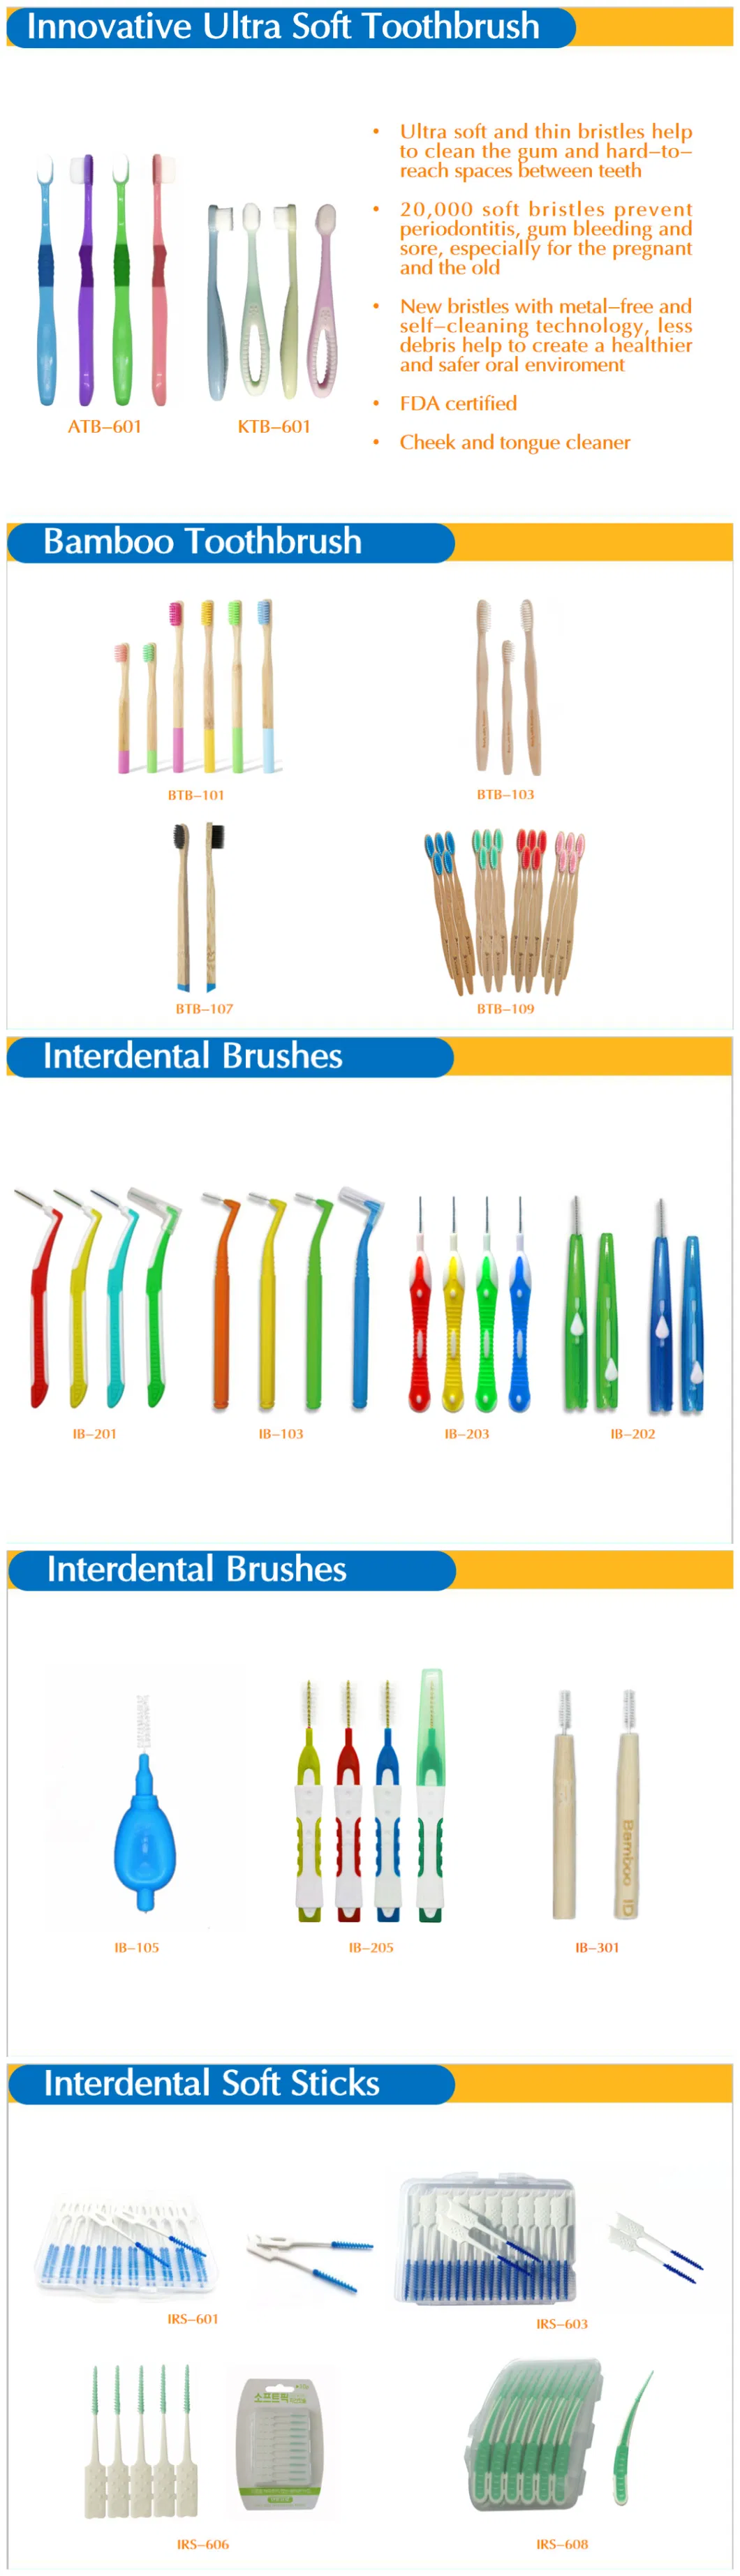 OEM Private Label Wire-Free Disposable Interdental Brush/Soft Stick/Pick with Customized Package